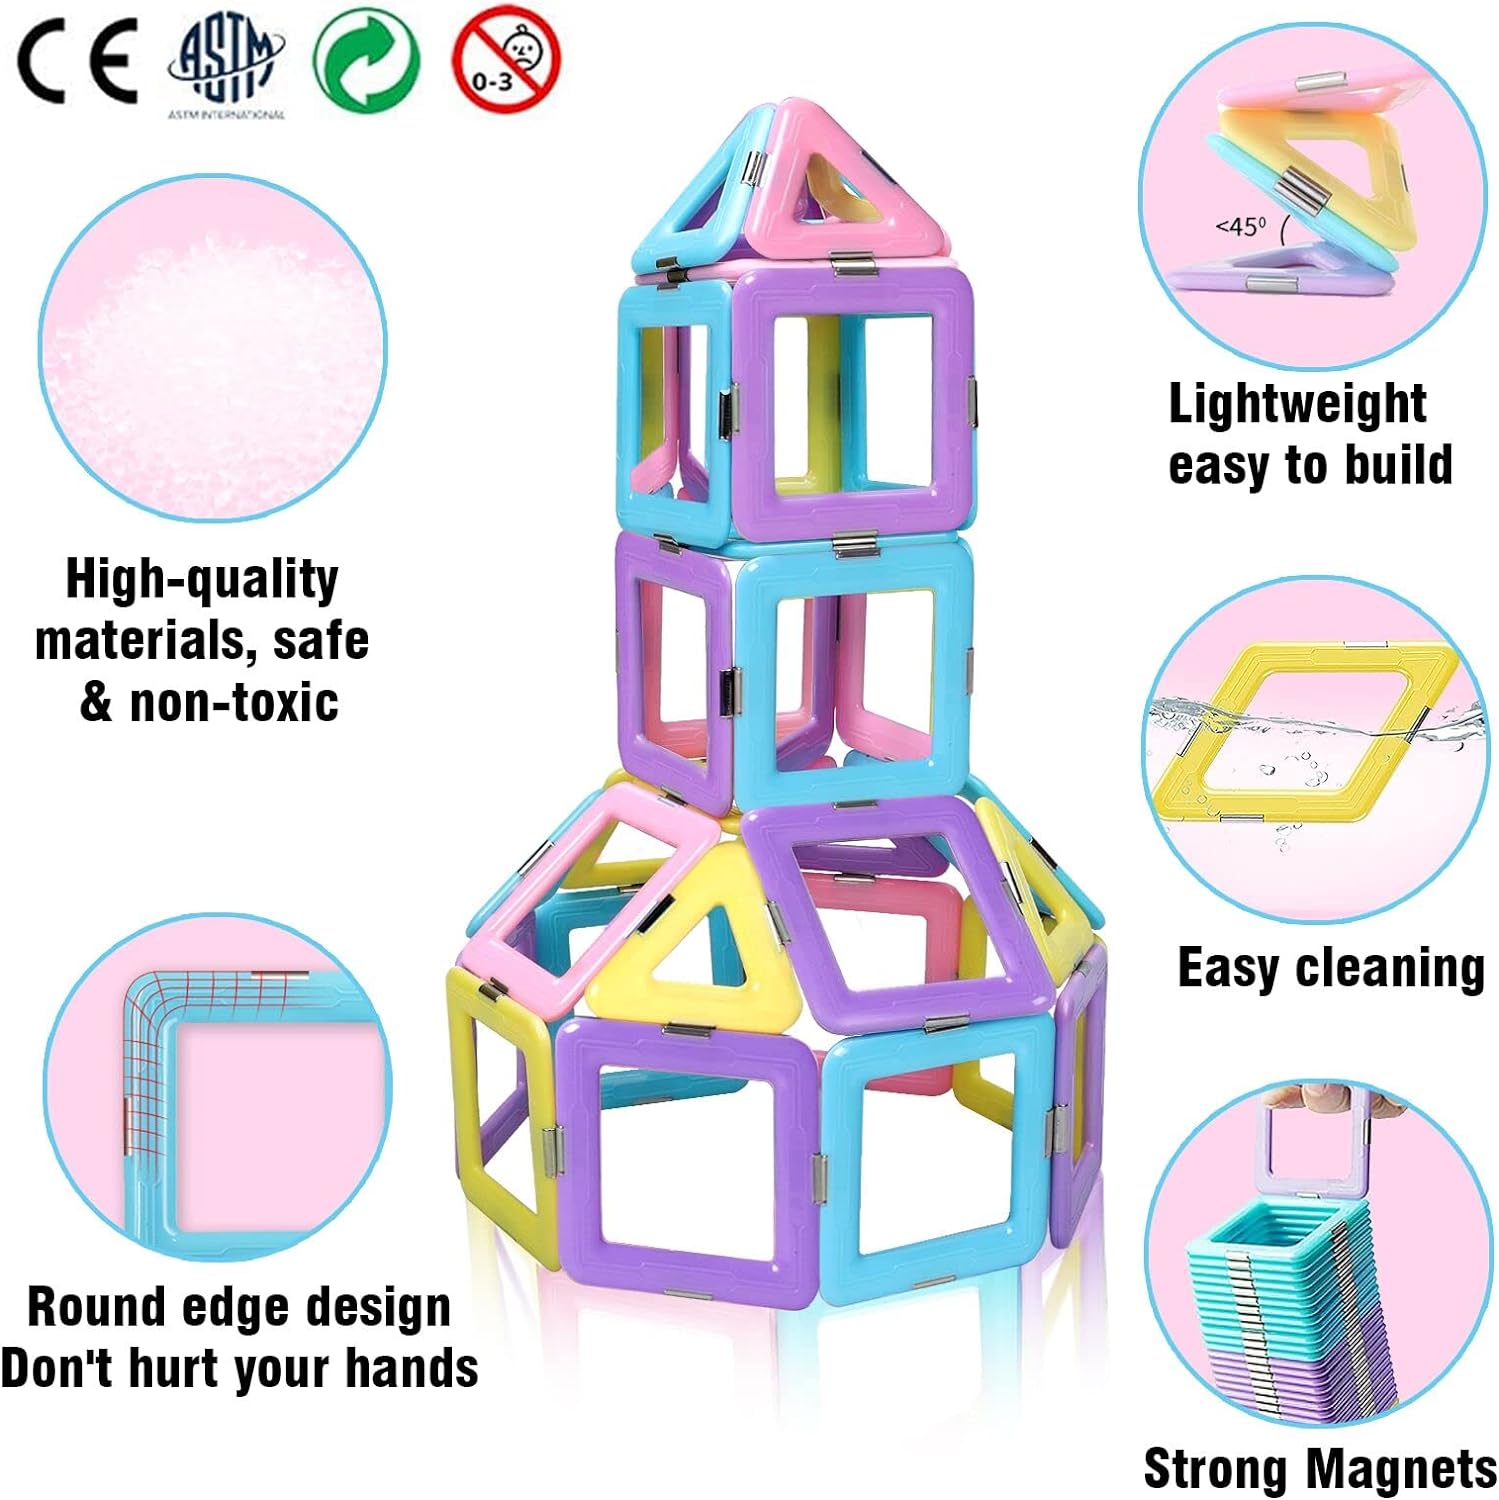 Magnetic Tiles Toys for 3 4 5 6 7 8+ Year Old Boys Girls Upgrade Macaron Castle Blocks Building Set for Toddlers STEM Creativity/Educational Toys for Kids Age 3-6 Christmas Birthday Gifts : Toys Games